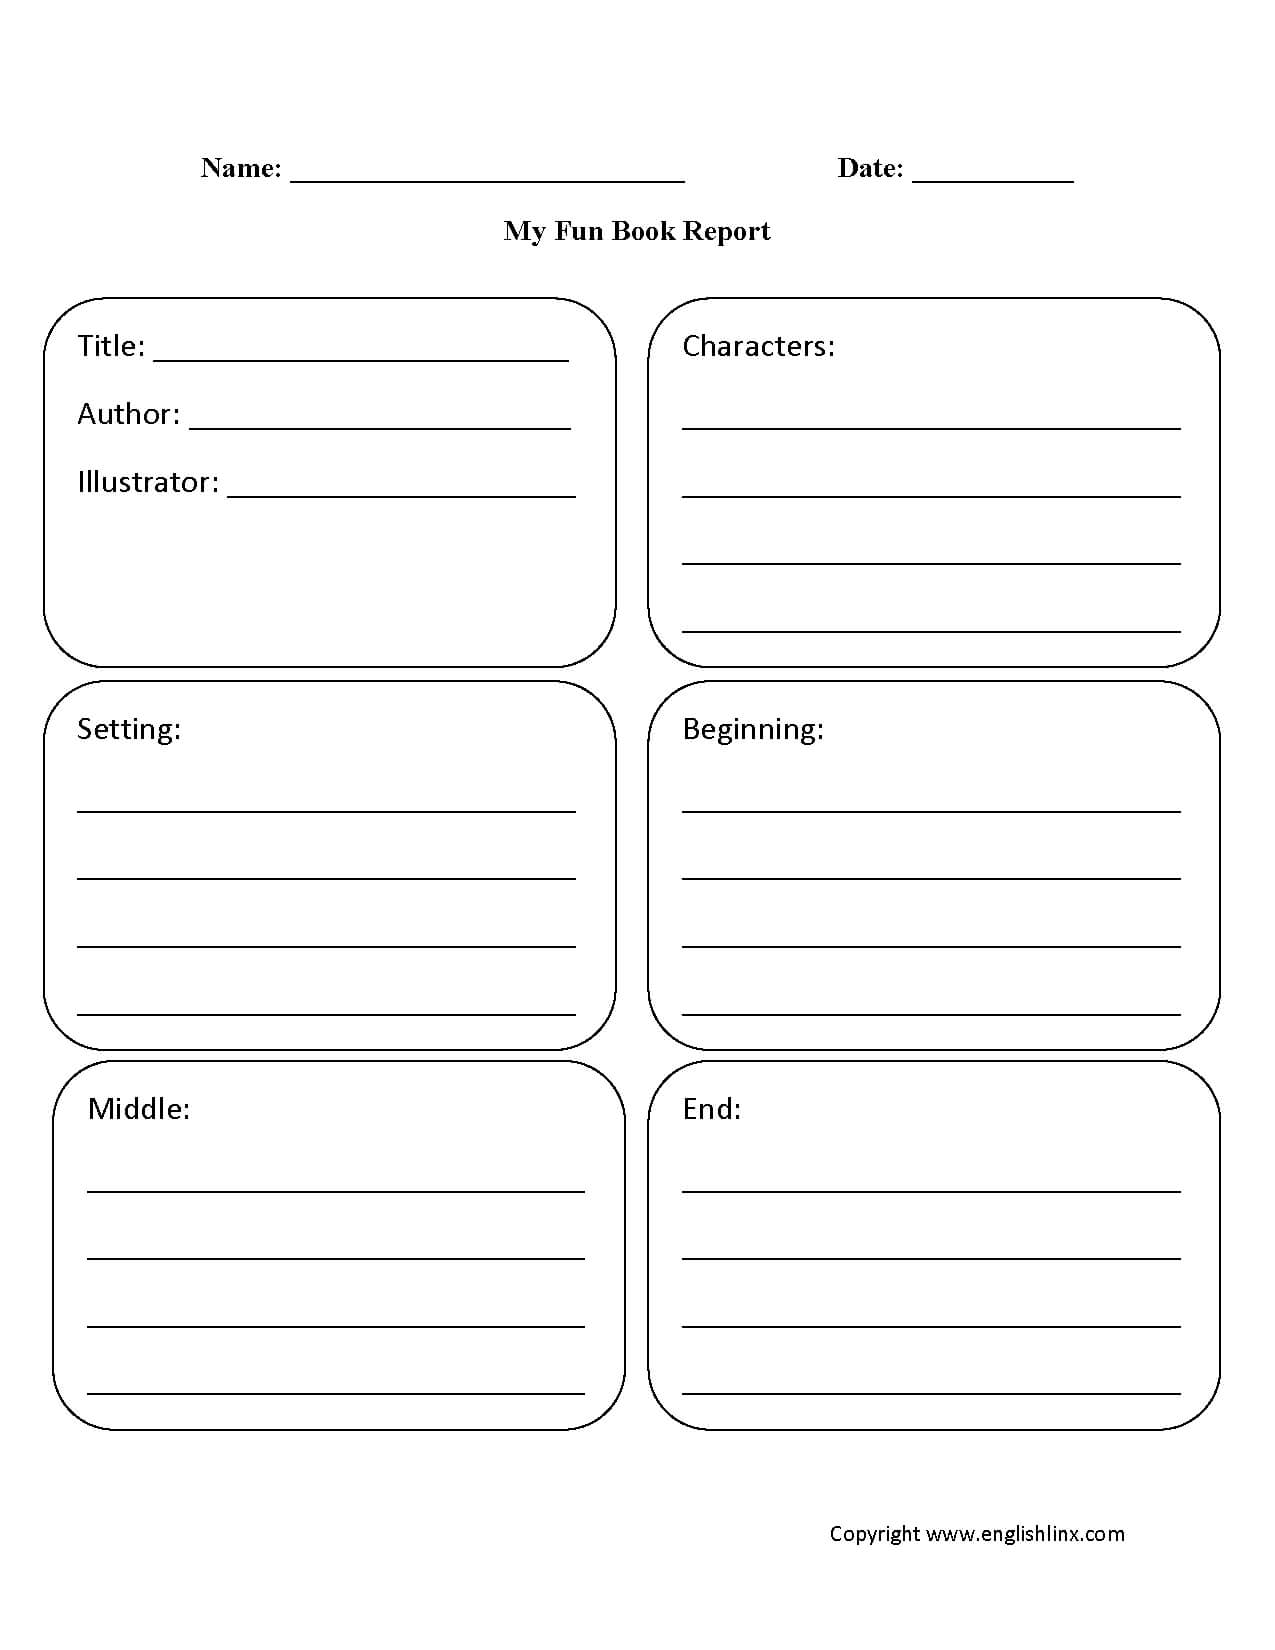 Englishlinx | Book Report Worksheets Throughout 2Nd Grade Book Report Template